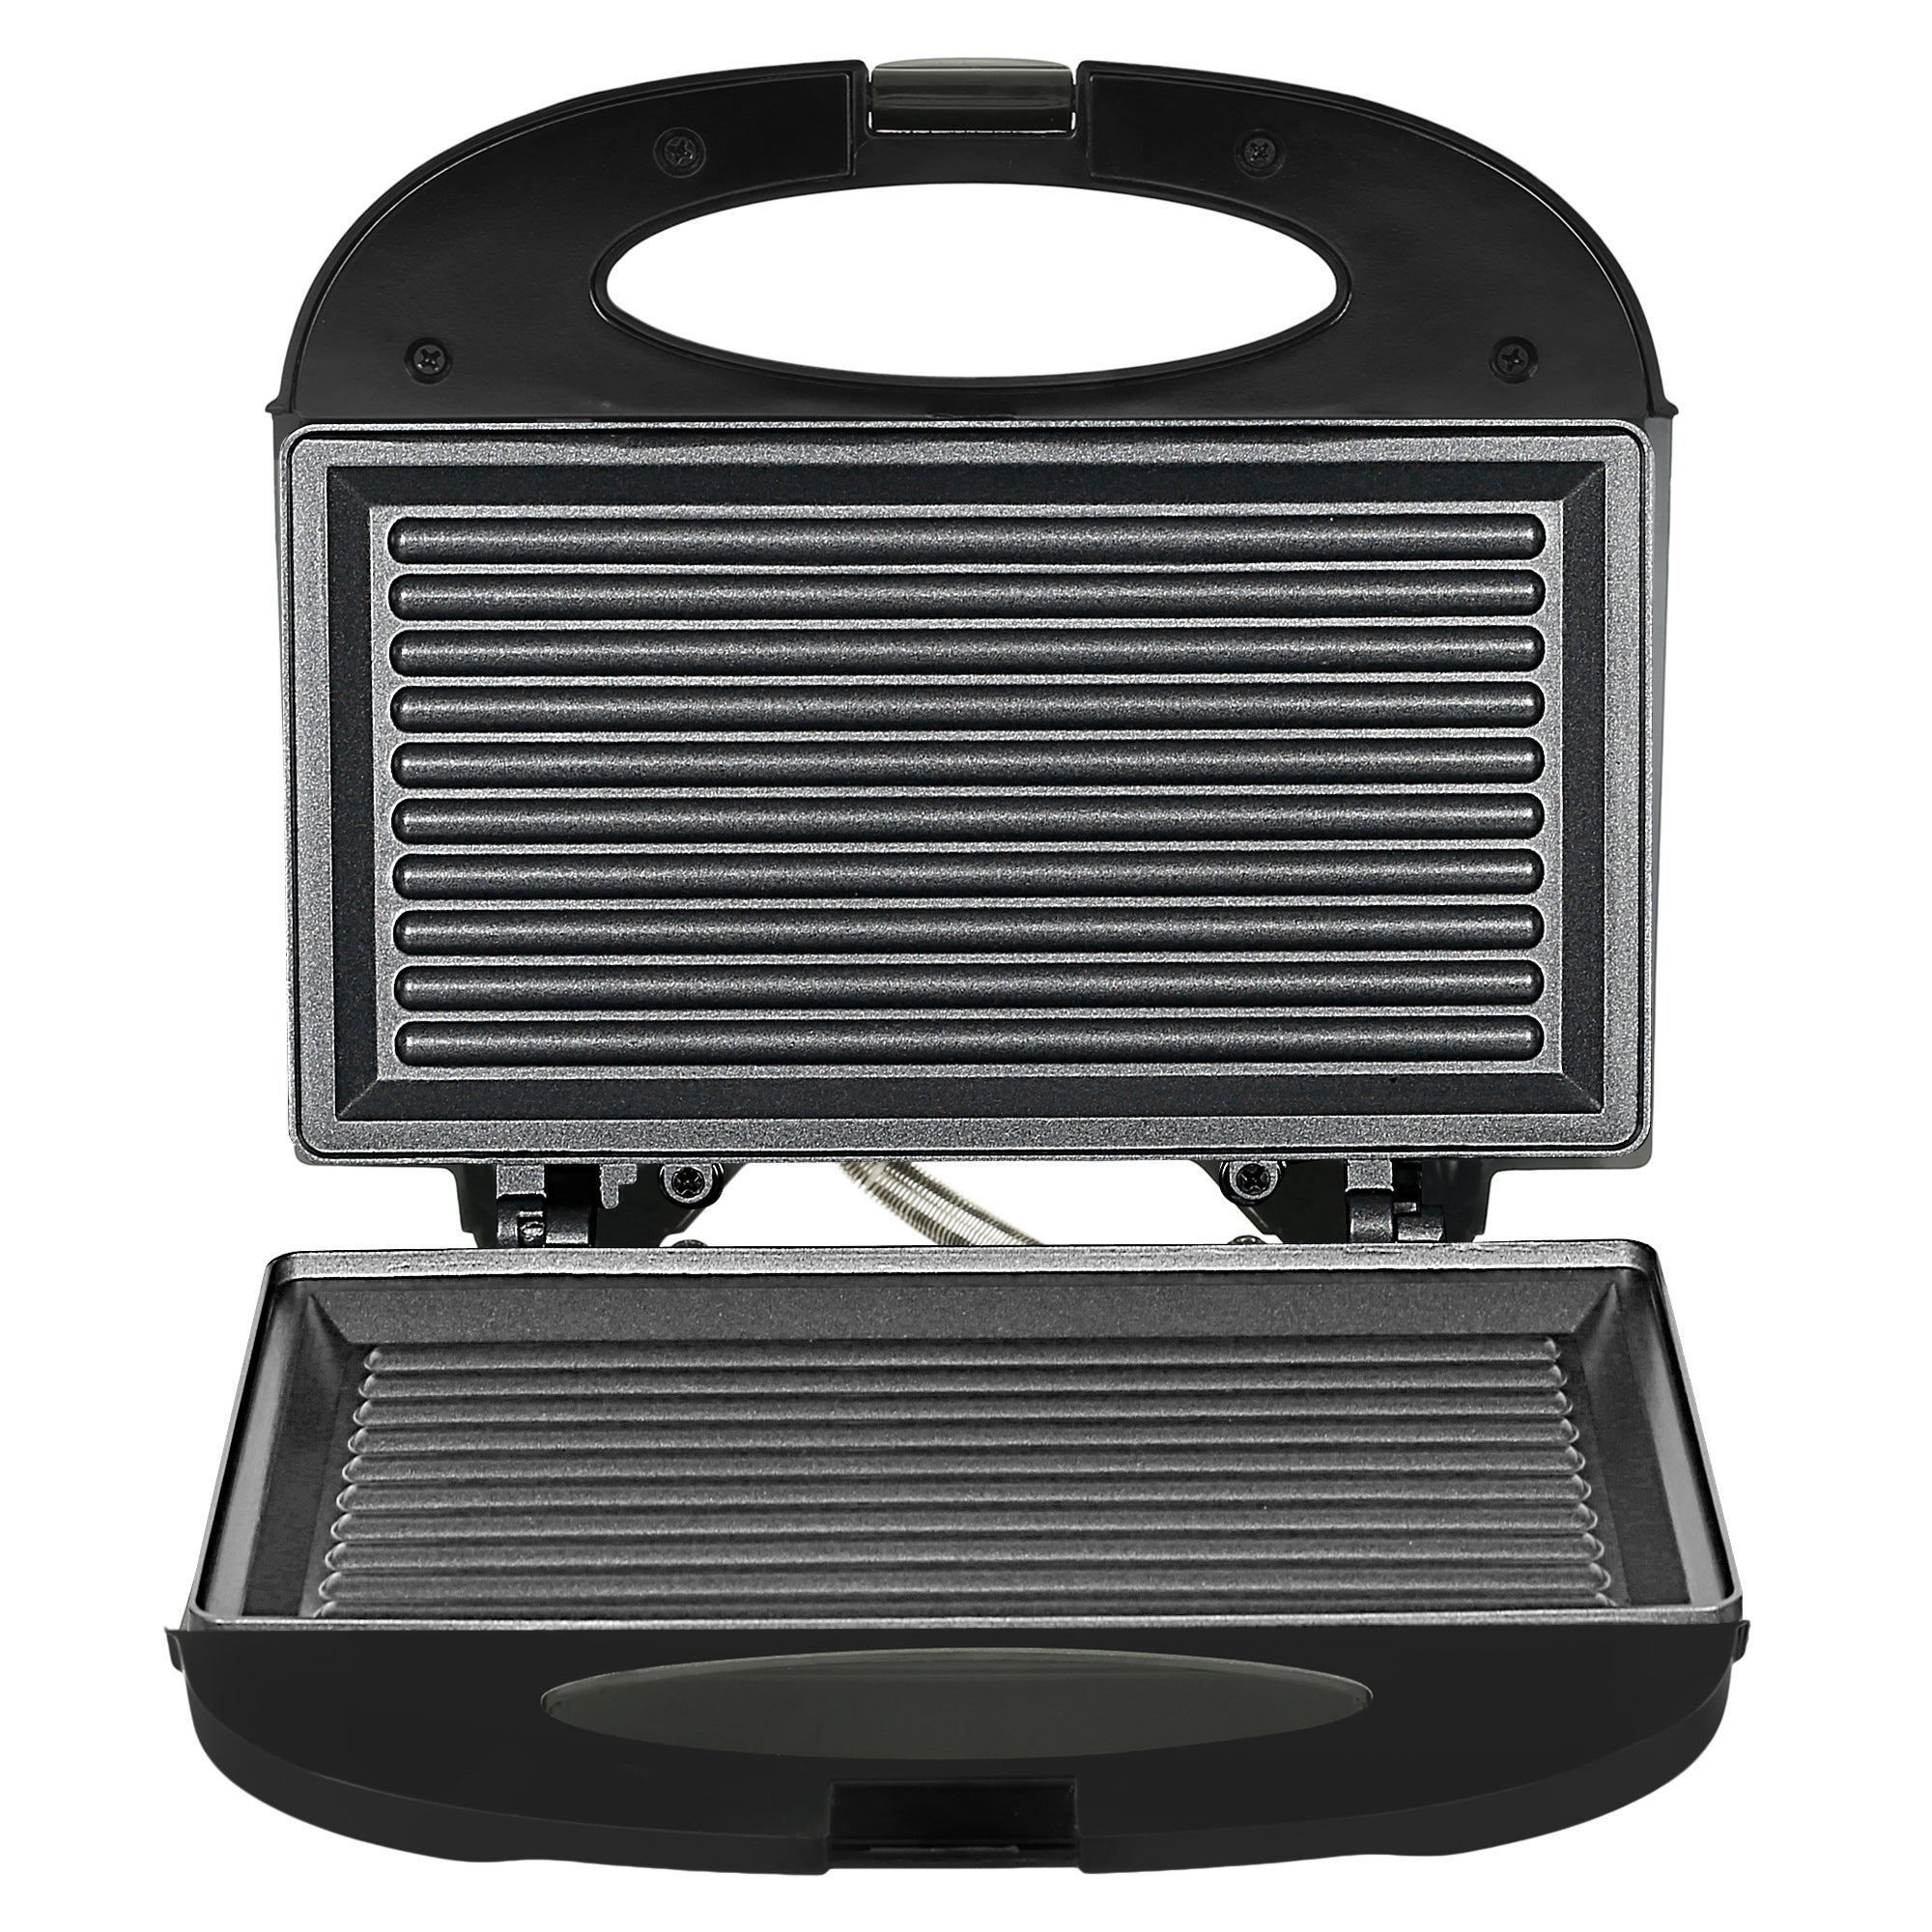 Buy Non-Sticky Grill Sandwich Maker Online only at Rs 1,450 only – Faber  India